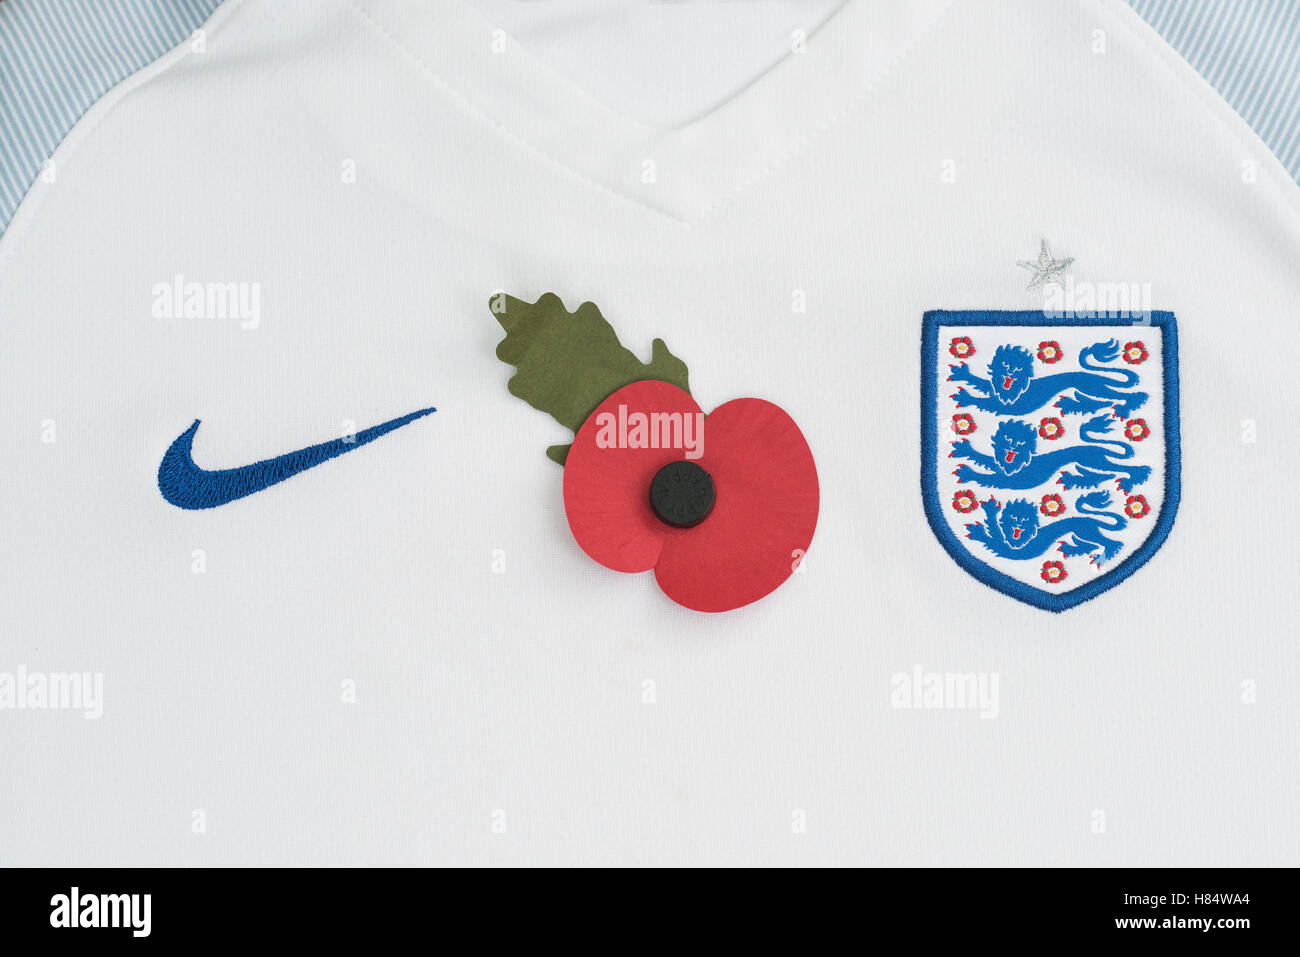 FIFA has banned players from England and Scotland from wearing poppies on their kits during their clash on November 11. The FA and SFA have said players will wear poppies on black armbands during their Armistice Day World Cup qualifier at Wembley. Stock Photo